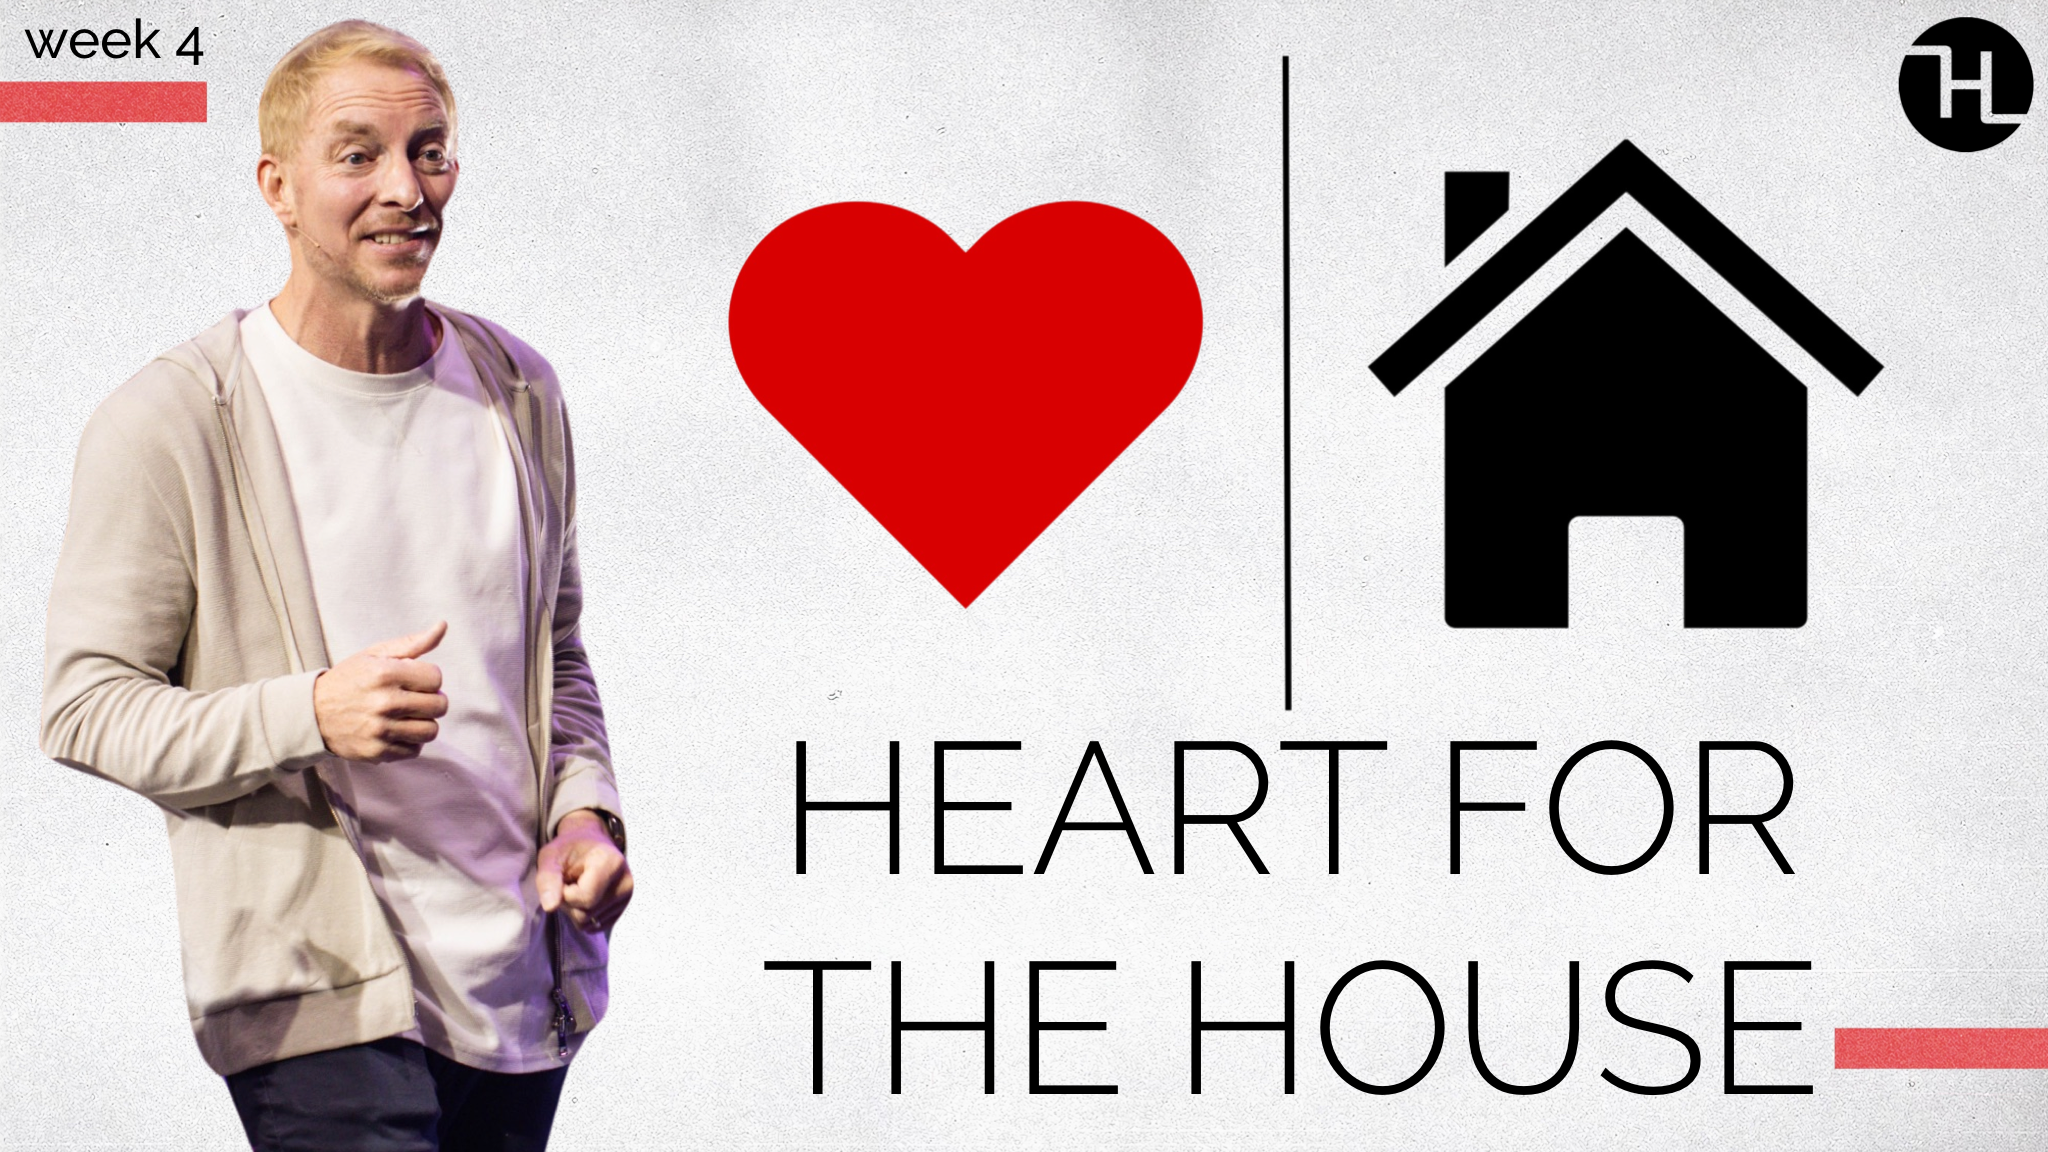 Heart for the House Week 4